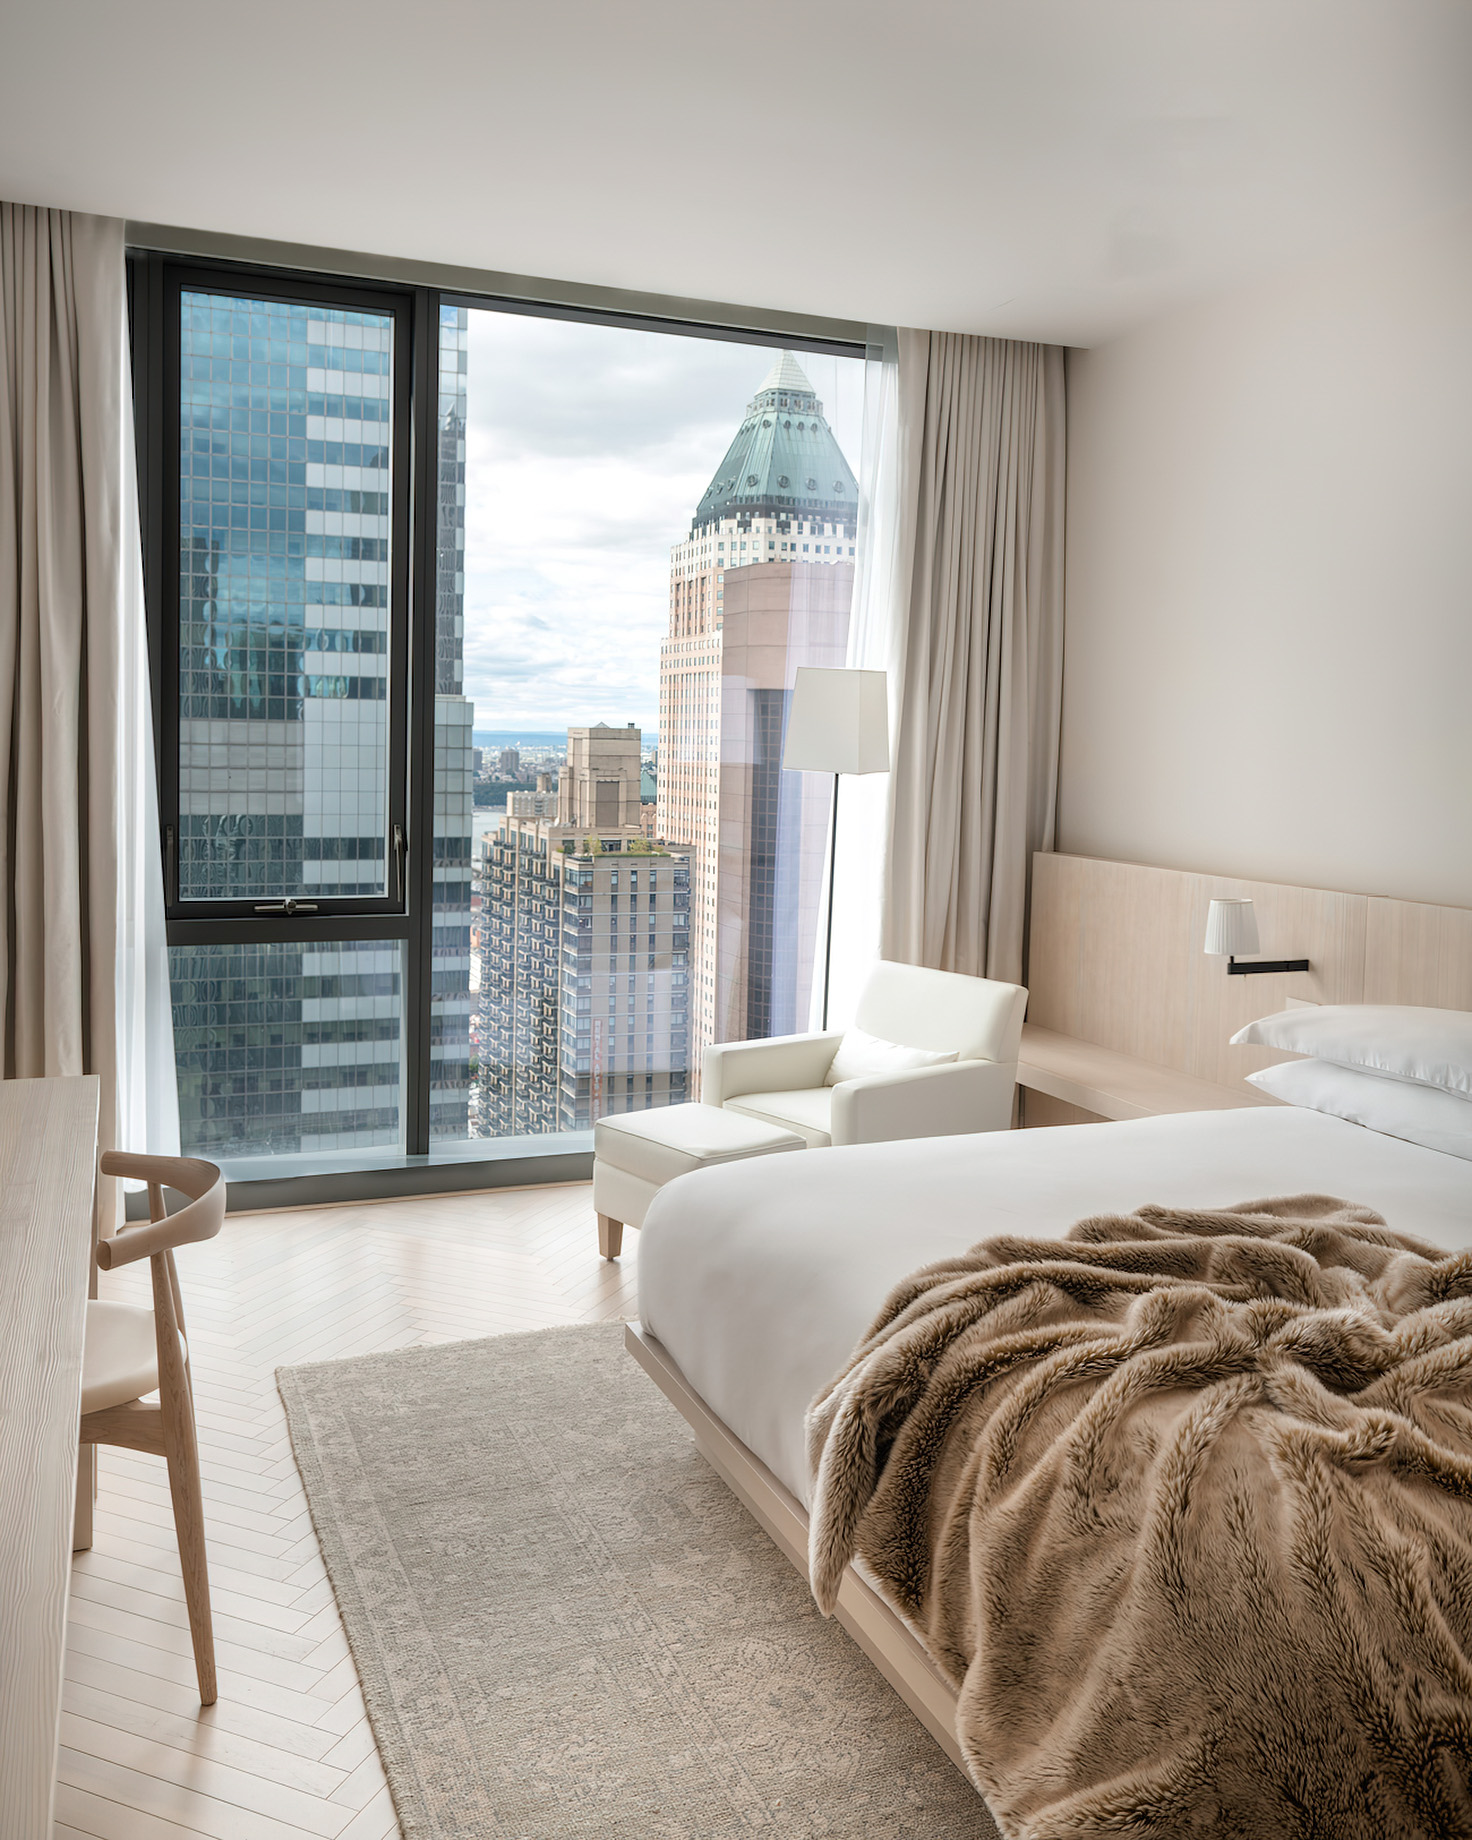 The Times Square EDITION Hotel – New York, NY, USA – Guest Room Interior View